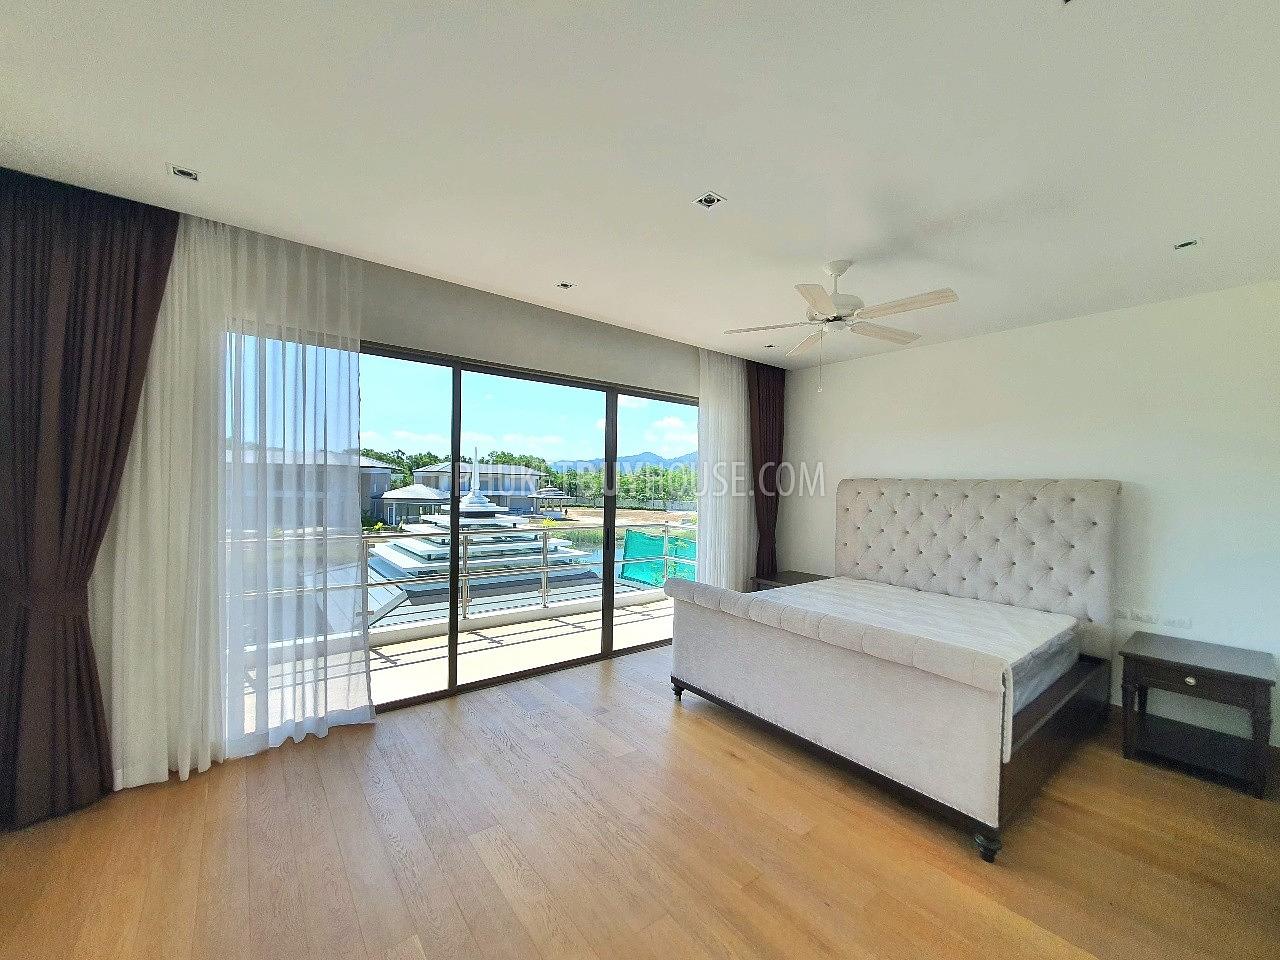 LAG6783: Magnificent New House For Sale in Laguna. Photo #31